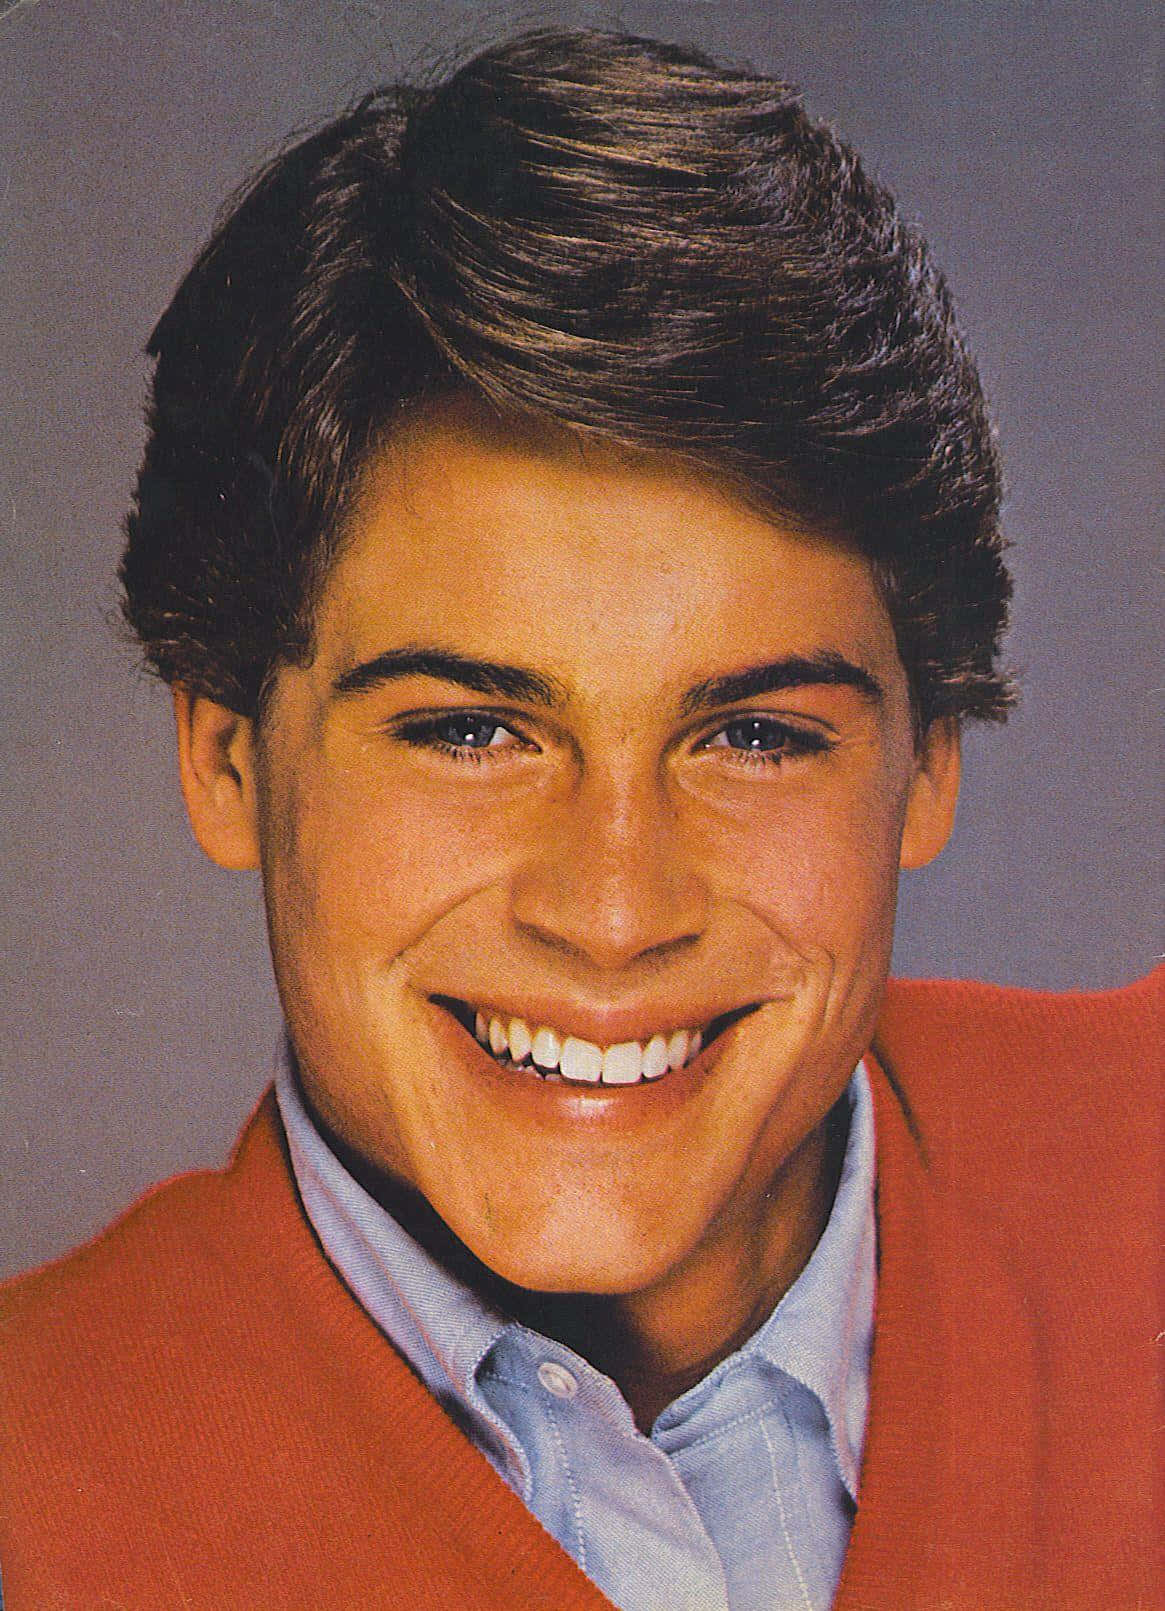 Actor Rob Lowe. Background